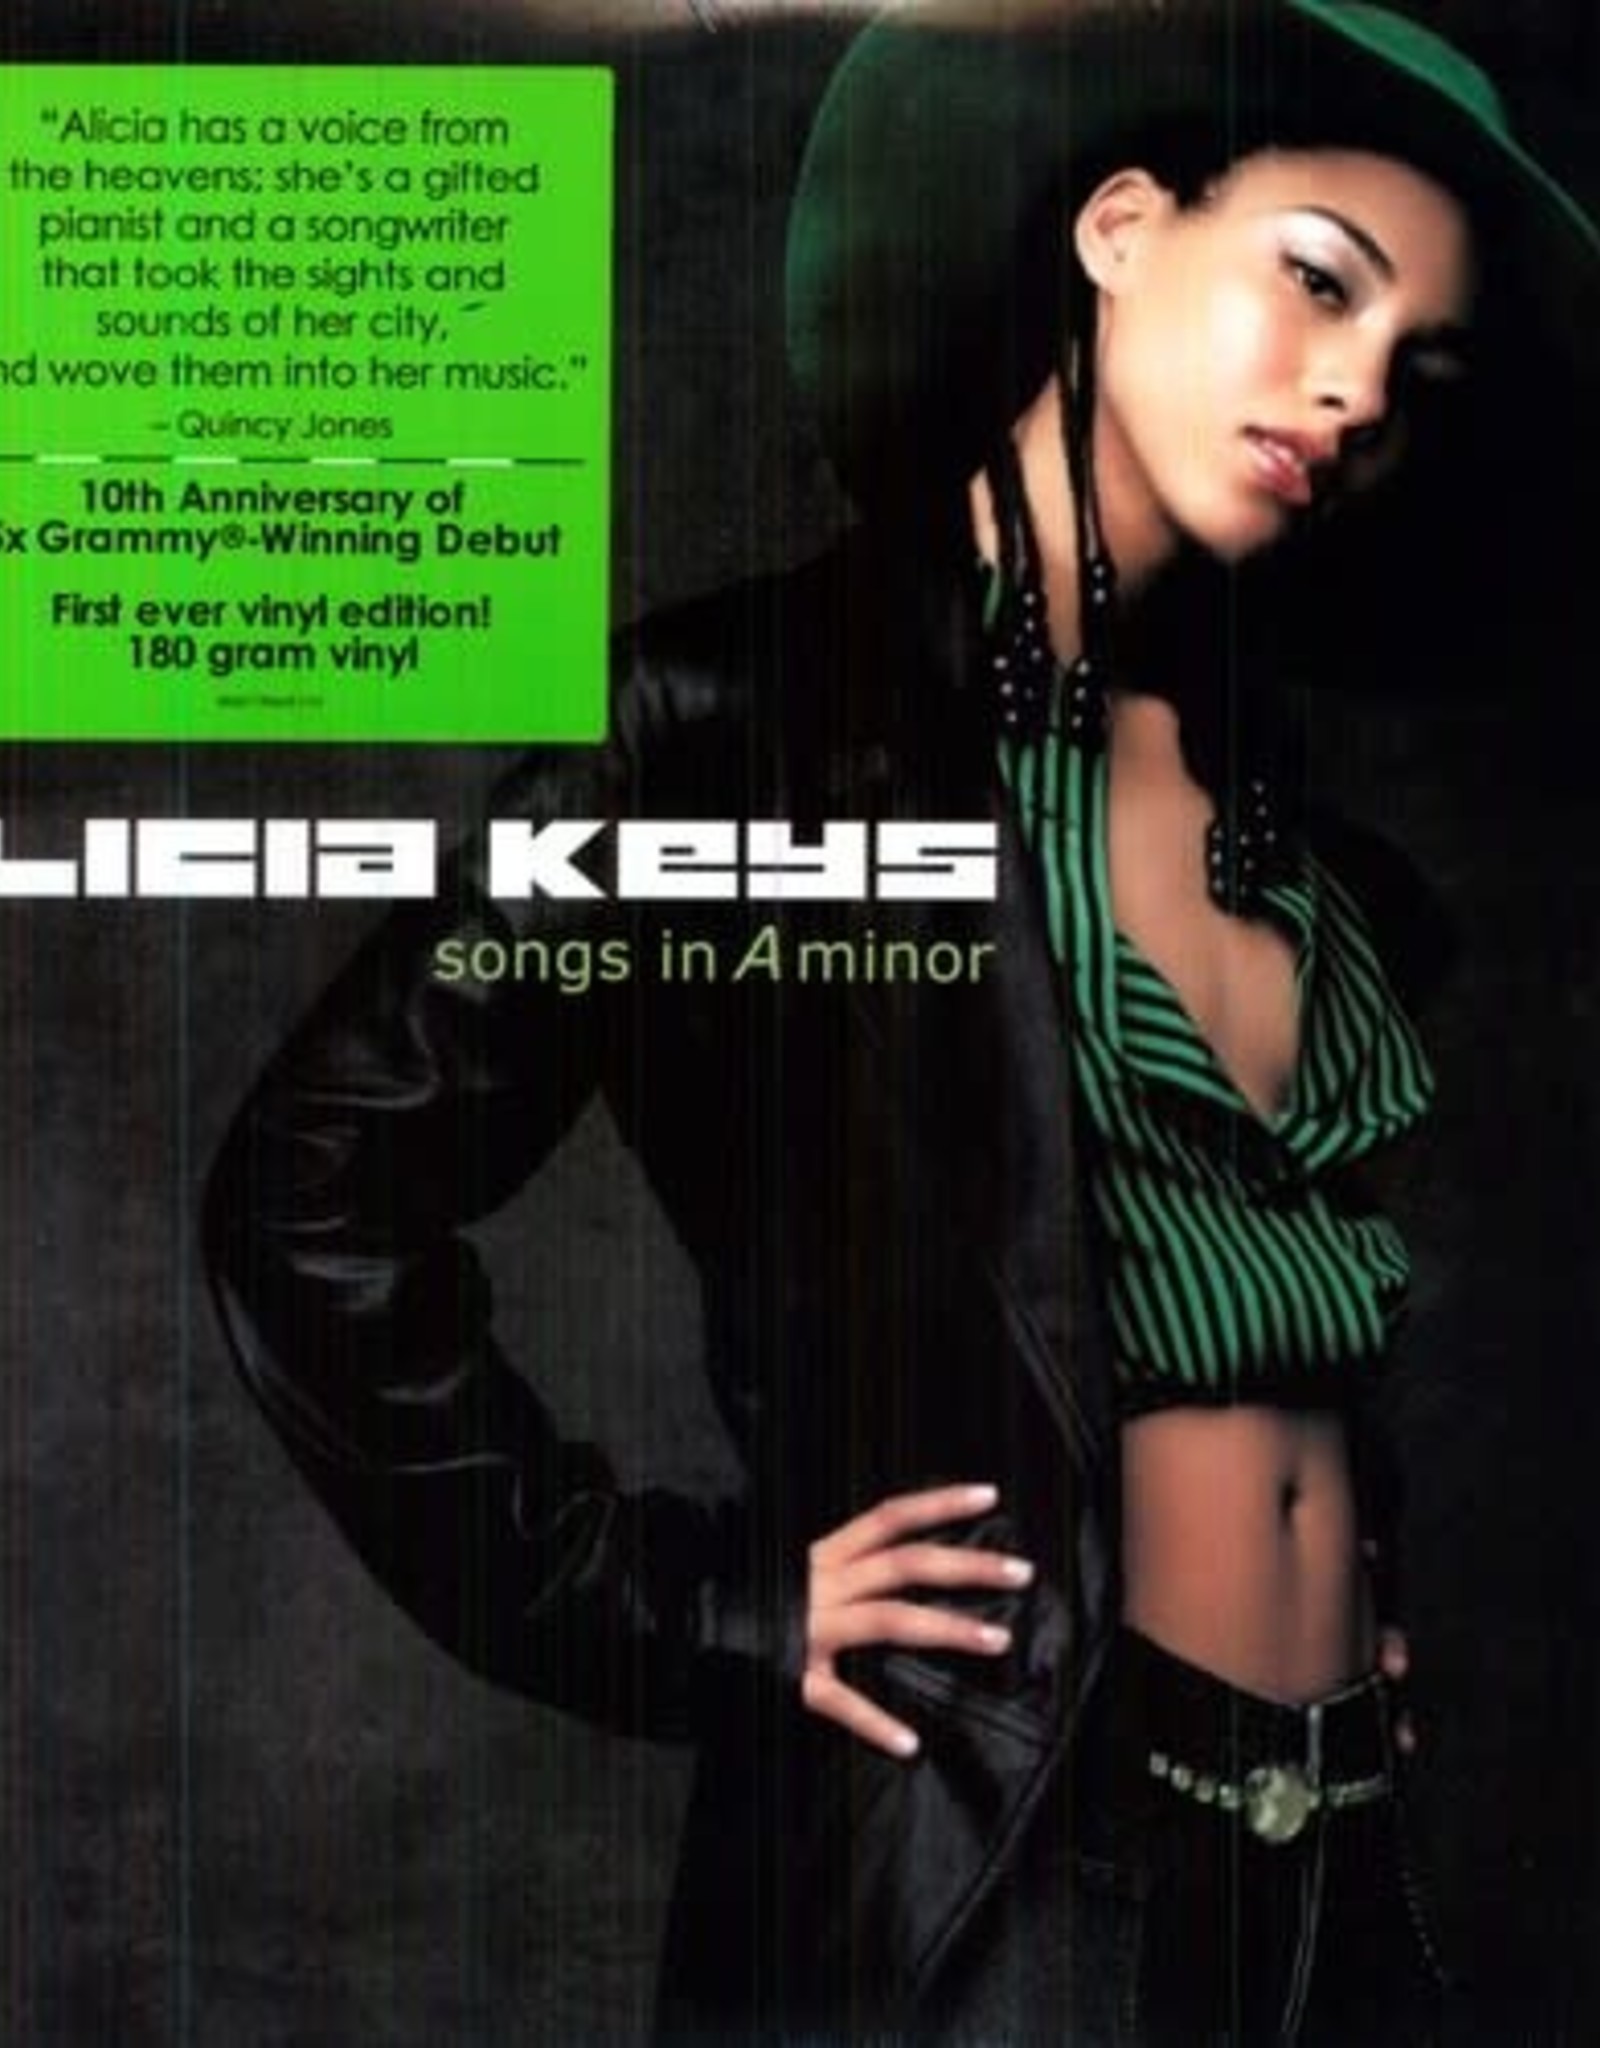 Alicia Keys - Songs in a Minor: 10th Anniversary Deluxe